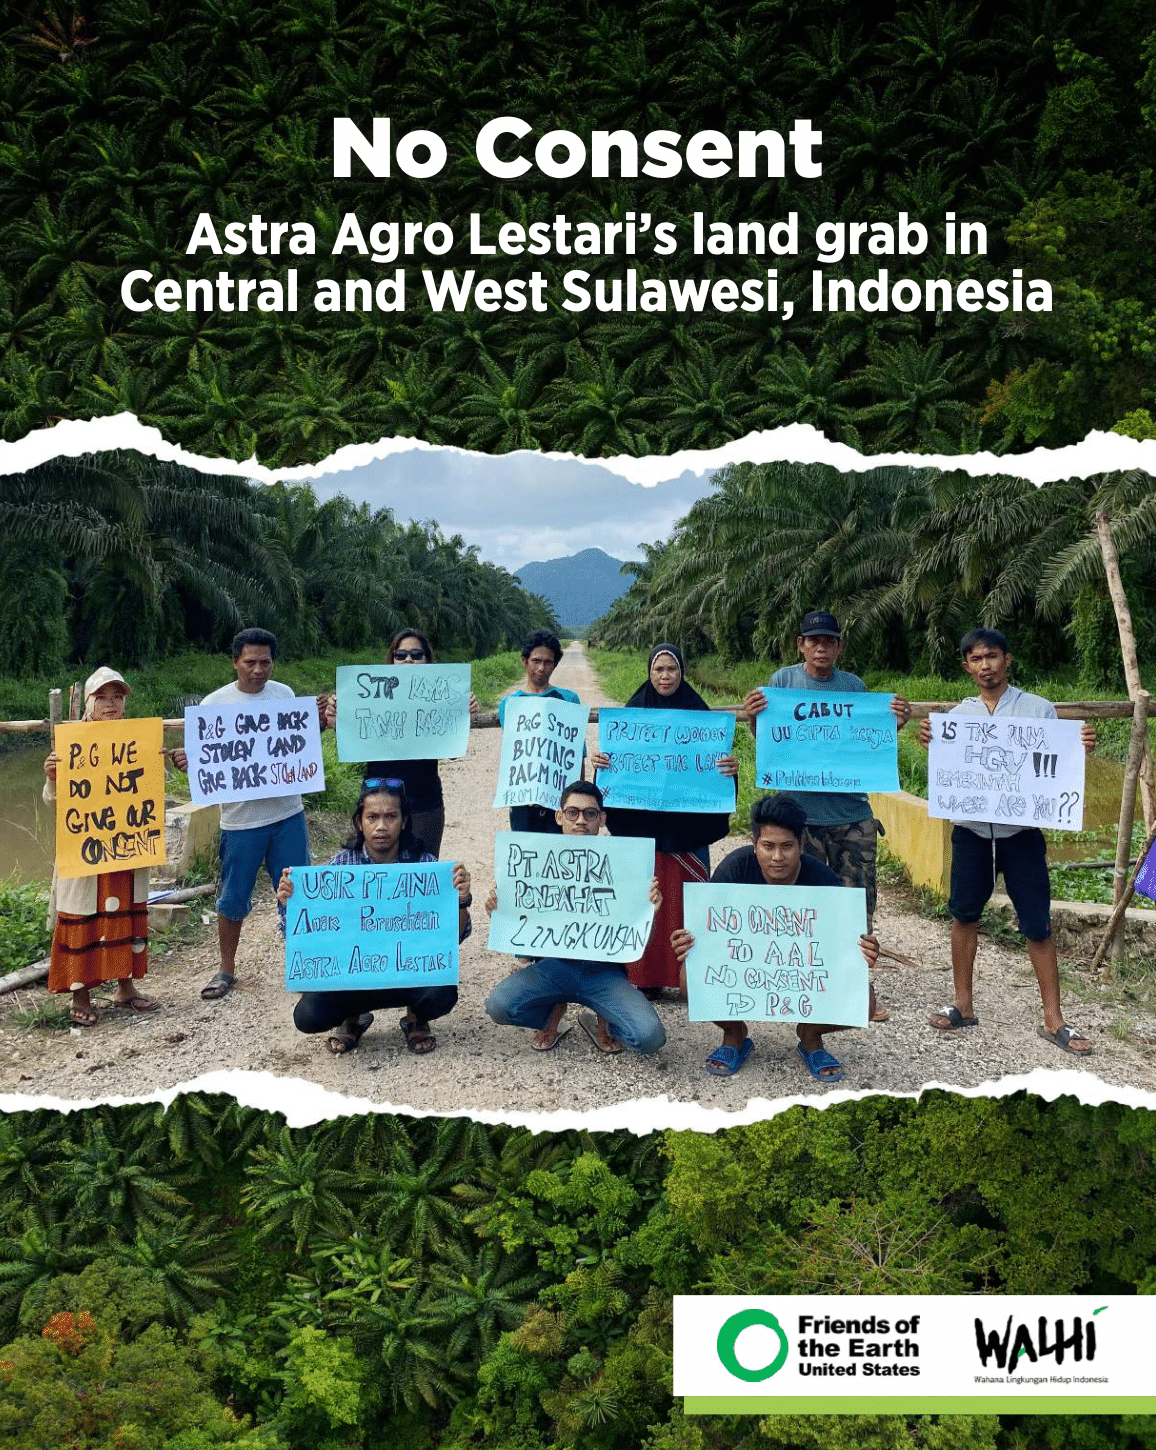 Meet the Financiers and Corporate Backers of Astra Agro Lestari’s Land Grab in Sulawesi, Indonesia